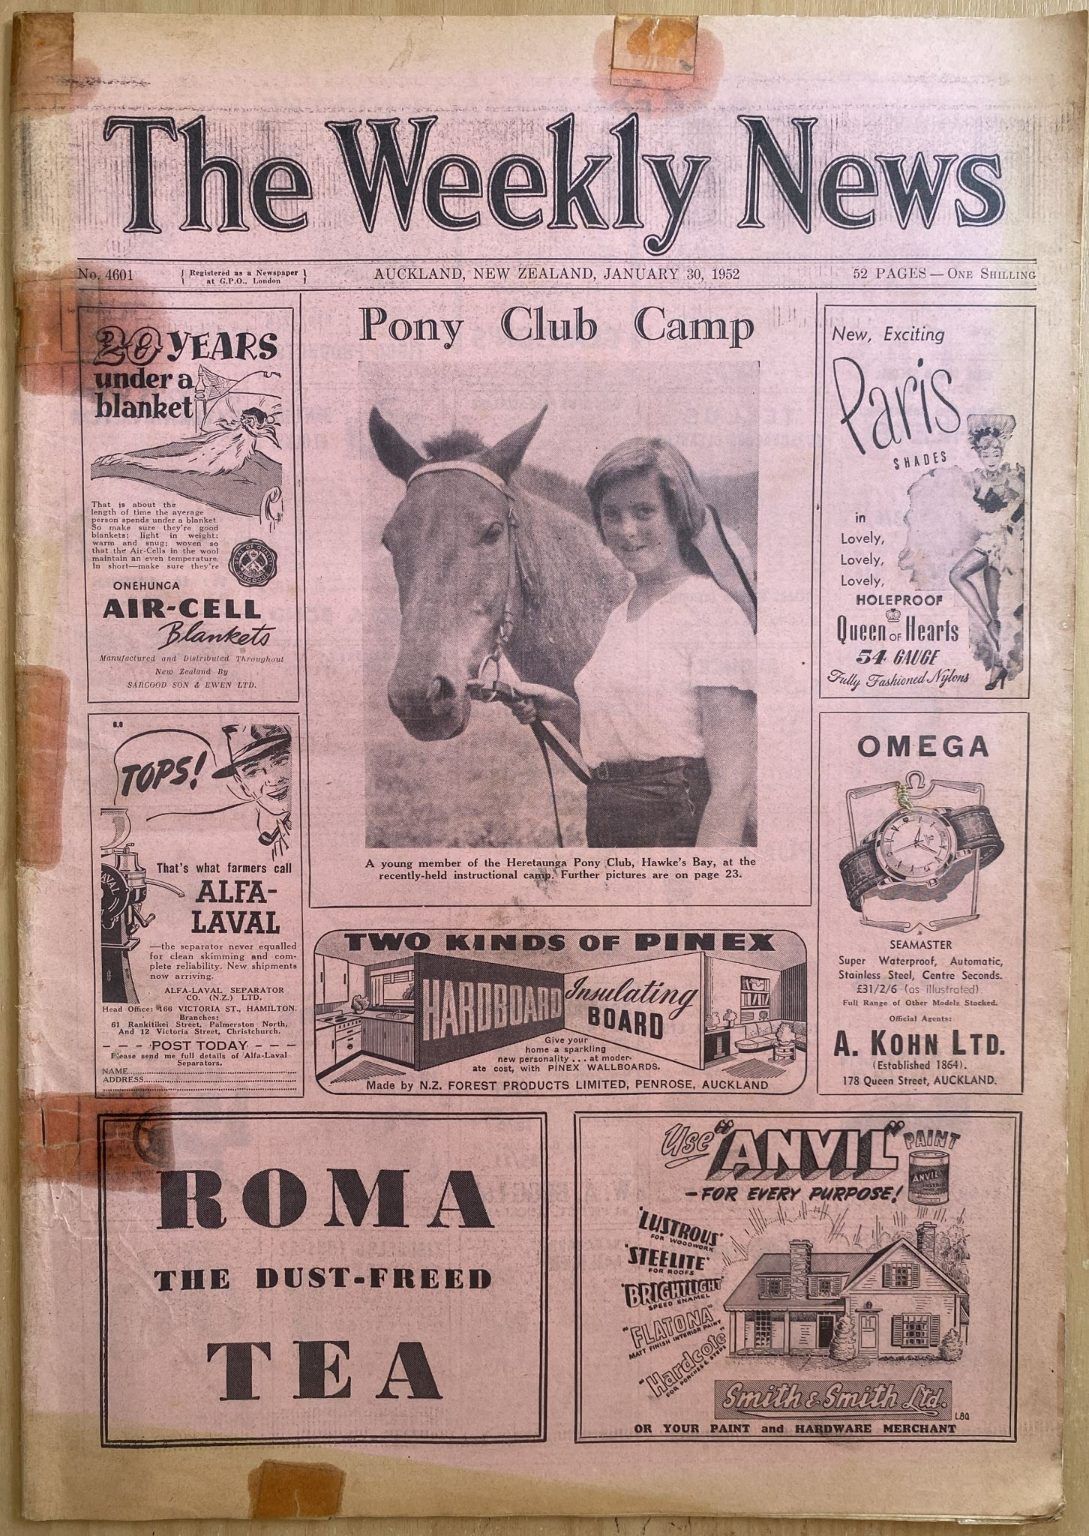 OLD NEWSPAPER: The Weekly News - No. 4601, 30 January 1952